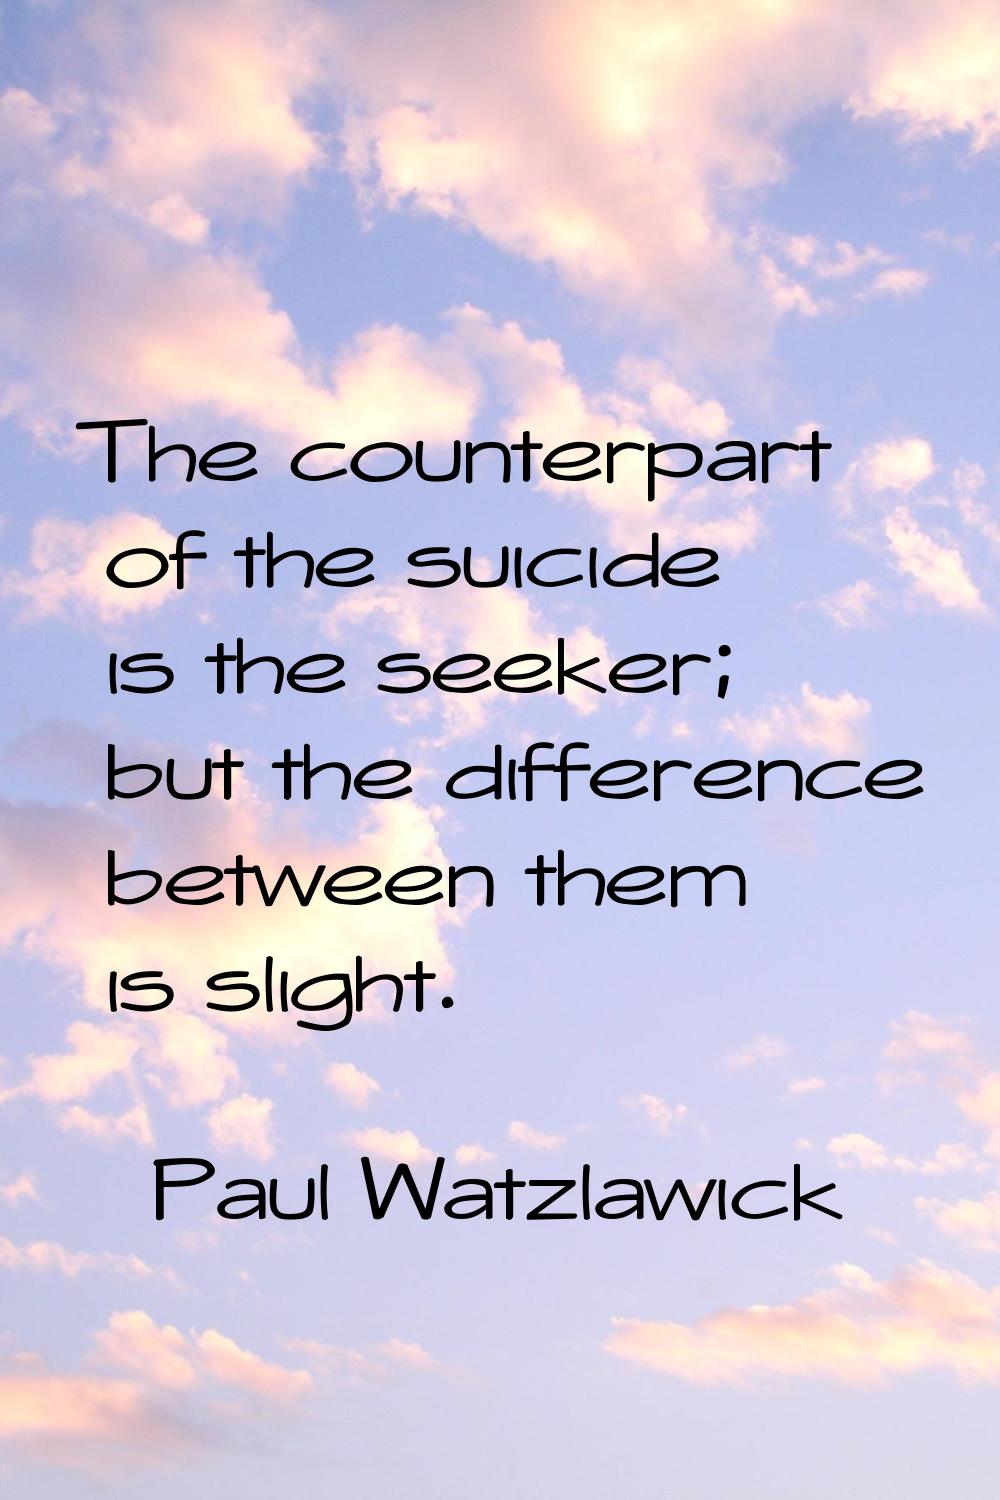 The counterpart of the suicide is the seeker; but the difference between them is slight.